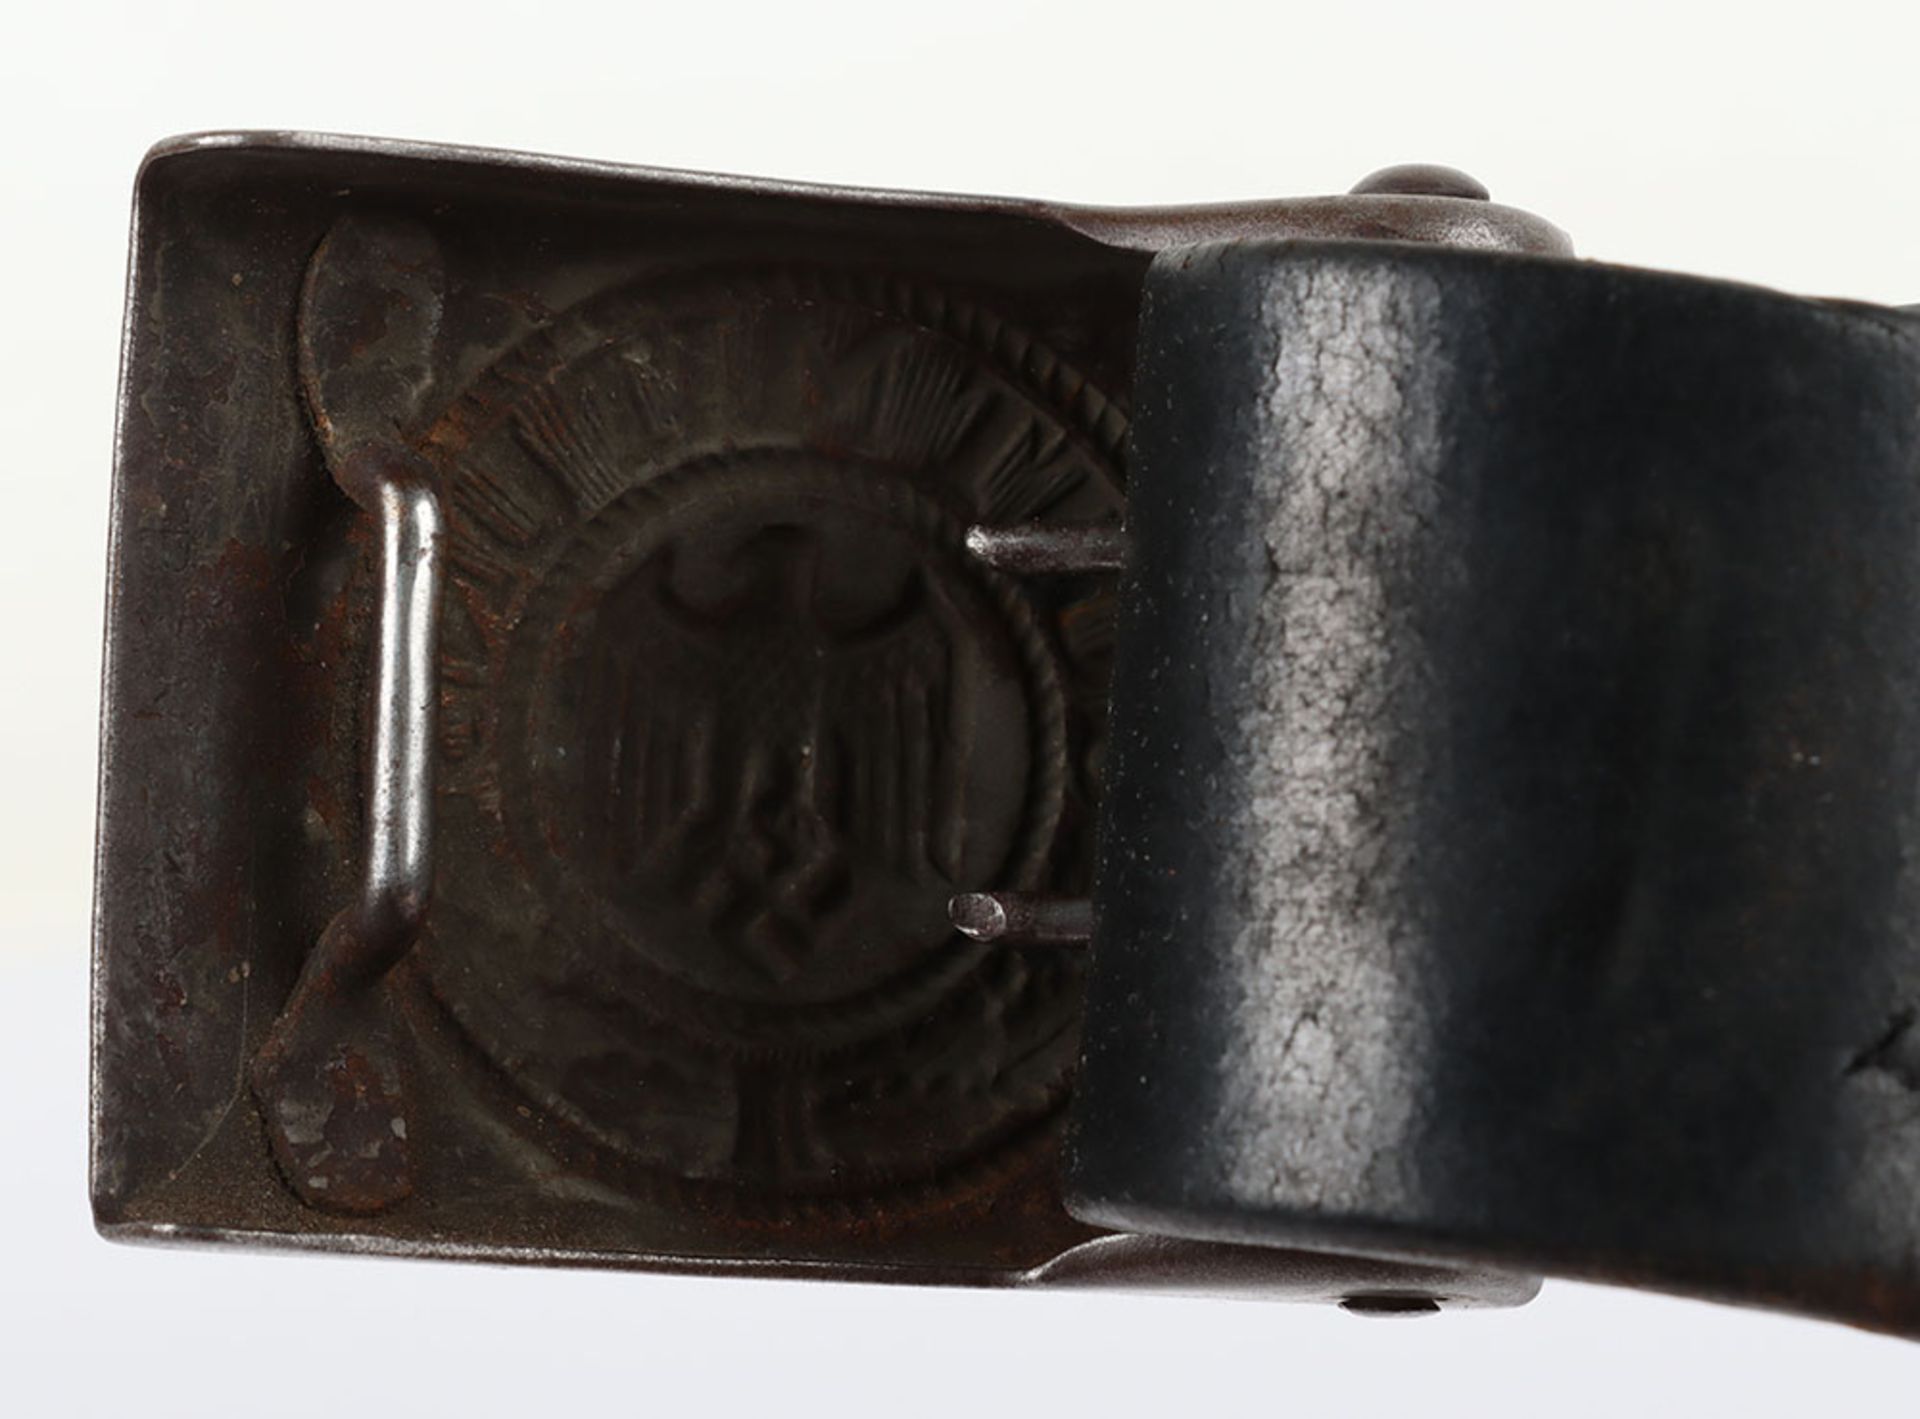 WW2 German Army Other Ranks Belt and Buckle - Image 4 of 6